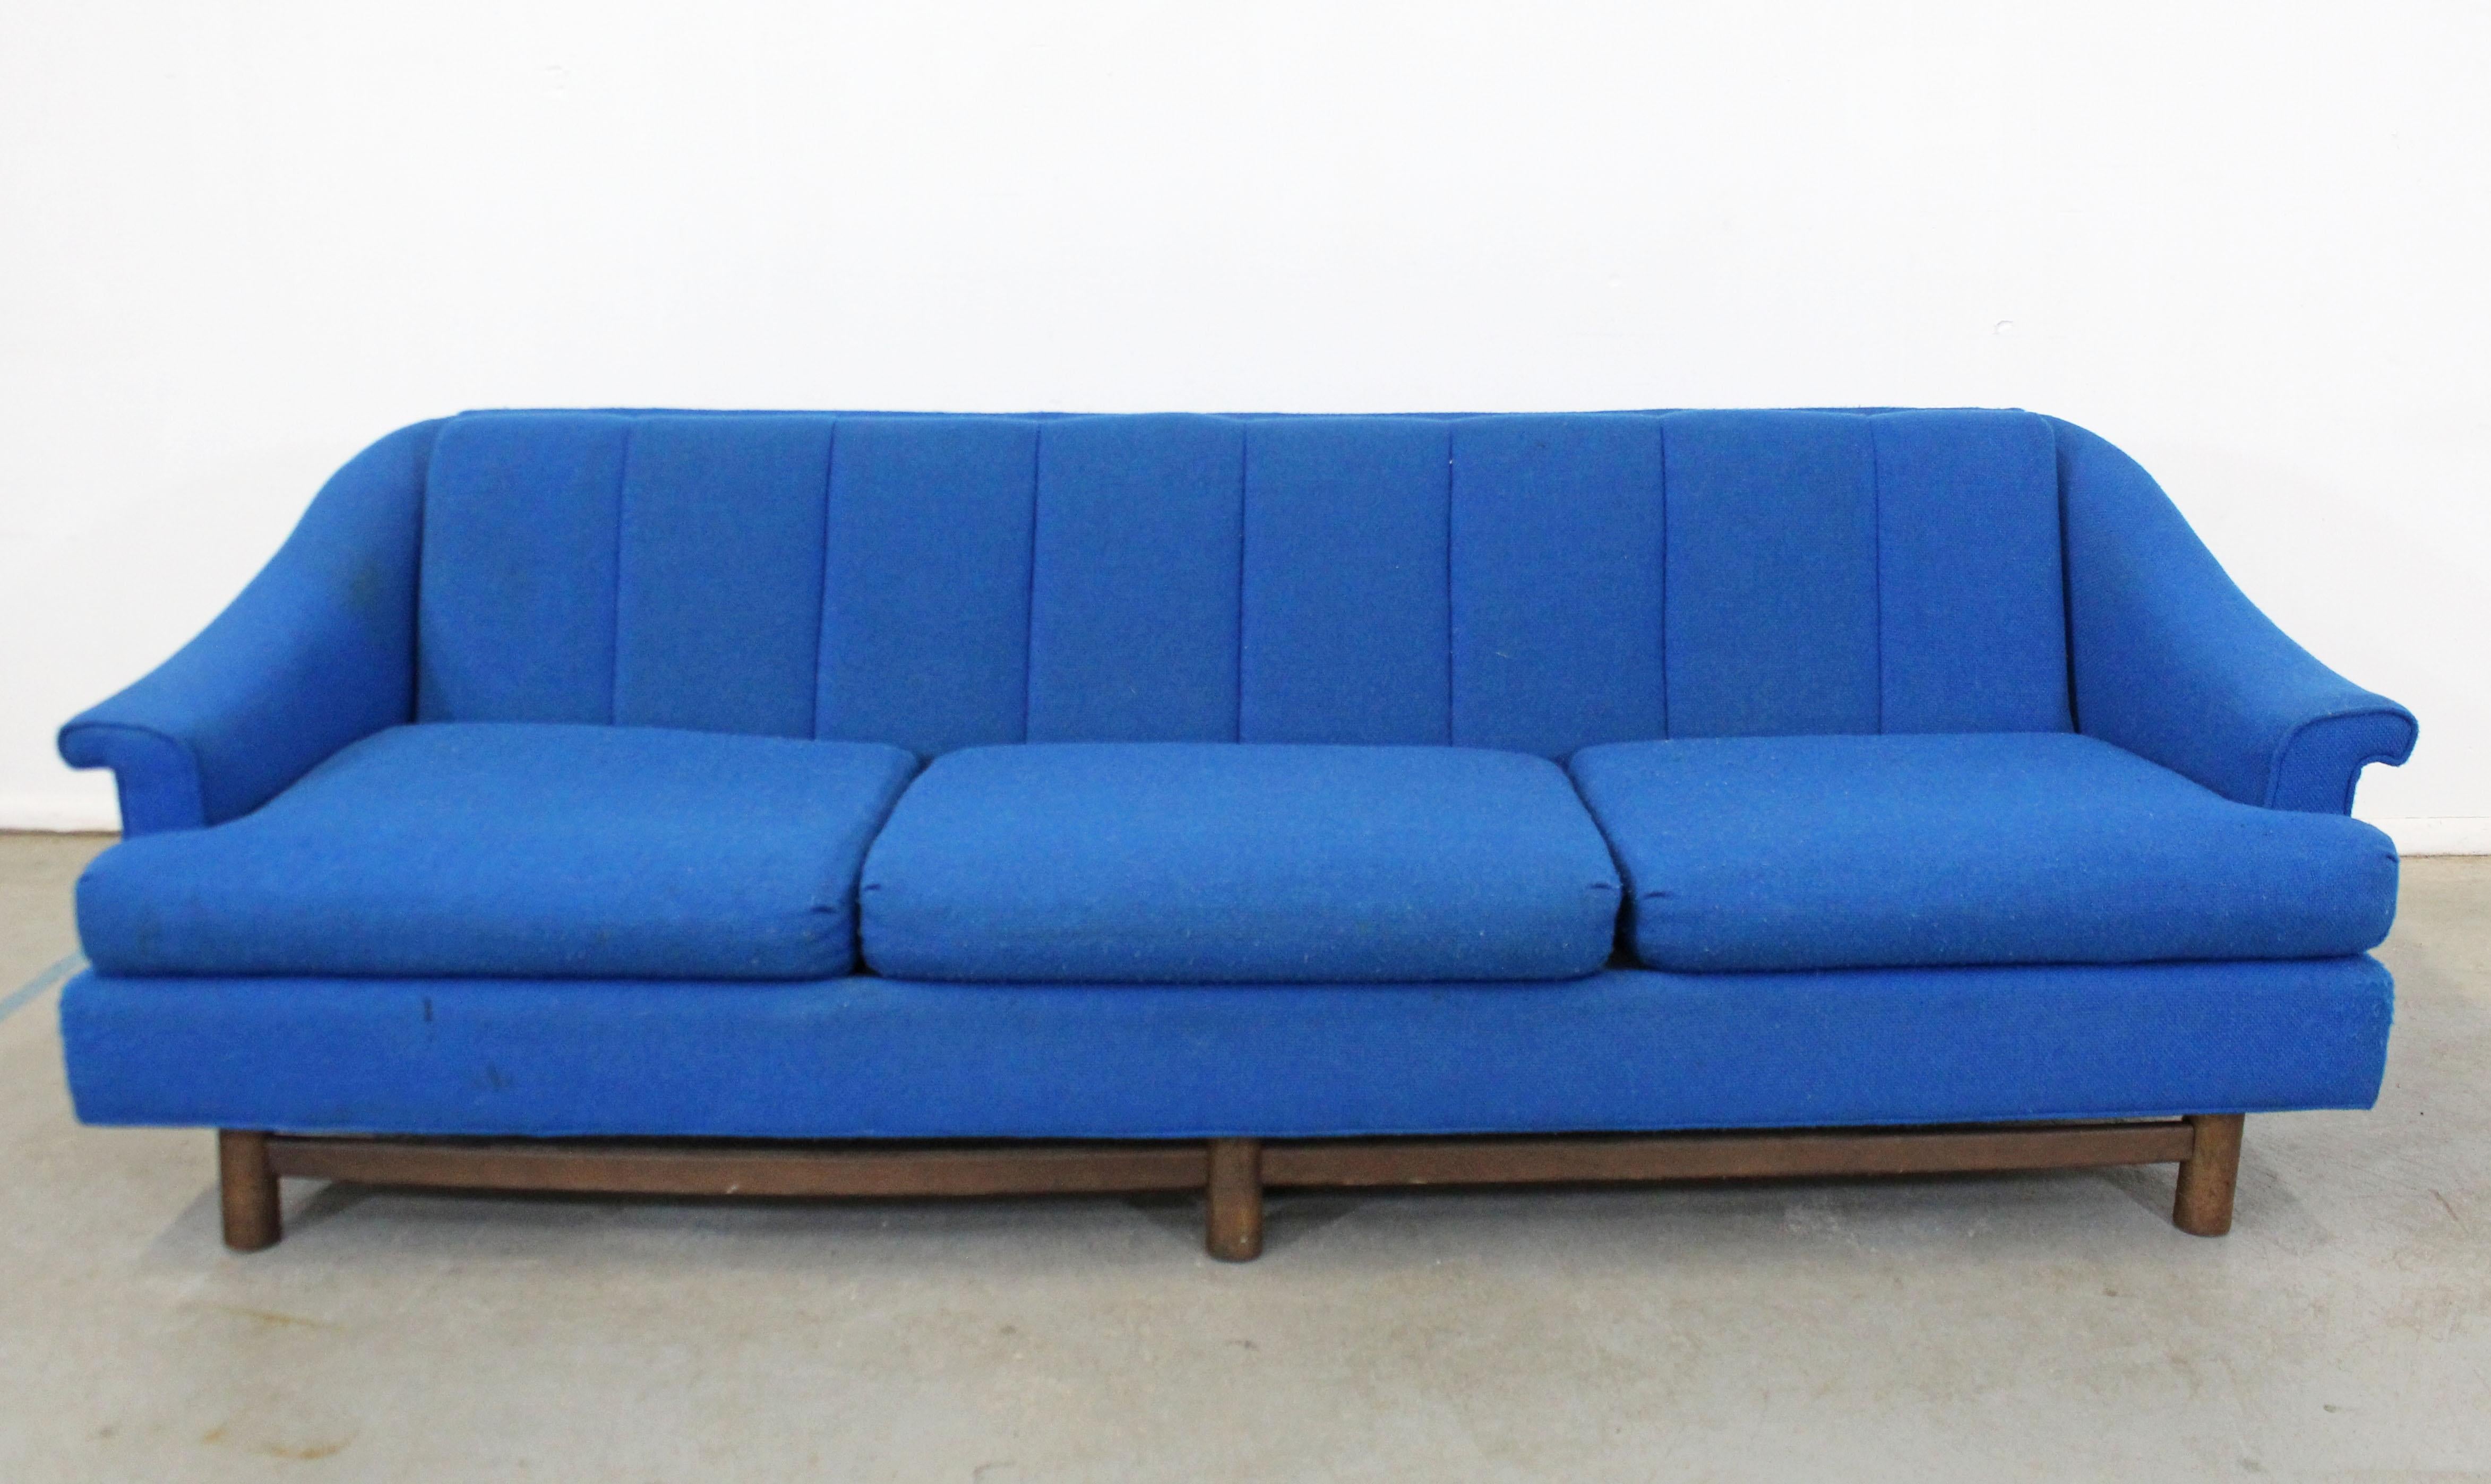 Offered is a vintage Mid-Century Modern sofa on a wooden base with three seat cushions. The cushioning is in good condition, but needs to be reupholstered. The sofa is structurally sound with some surface scratches on the wood. It is not